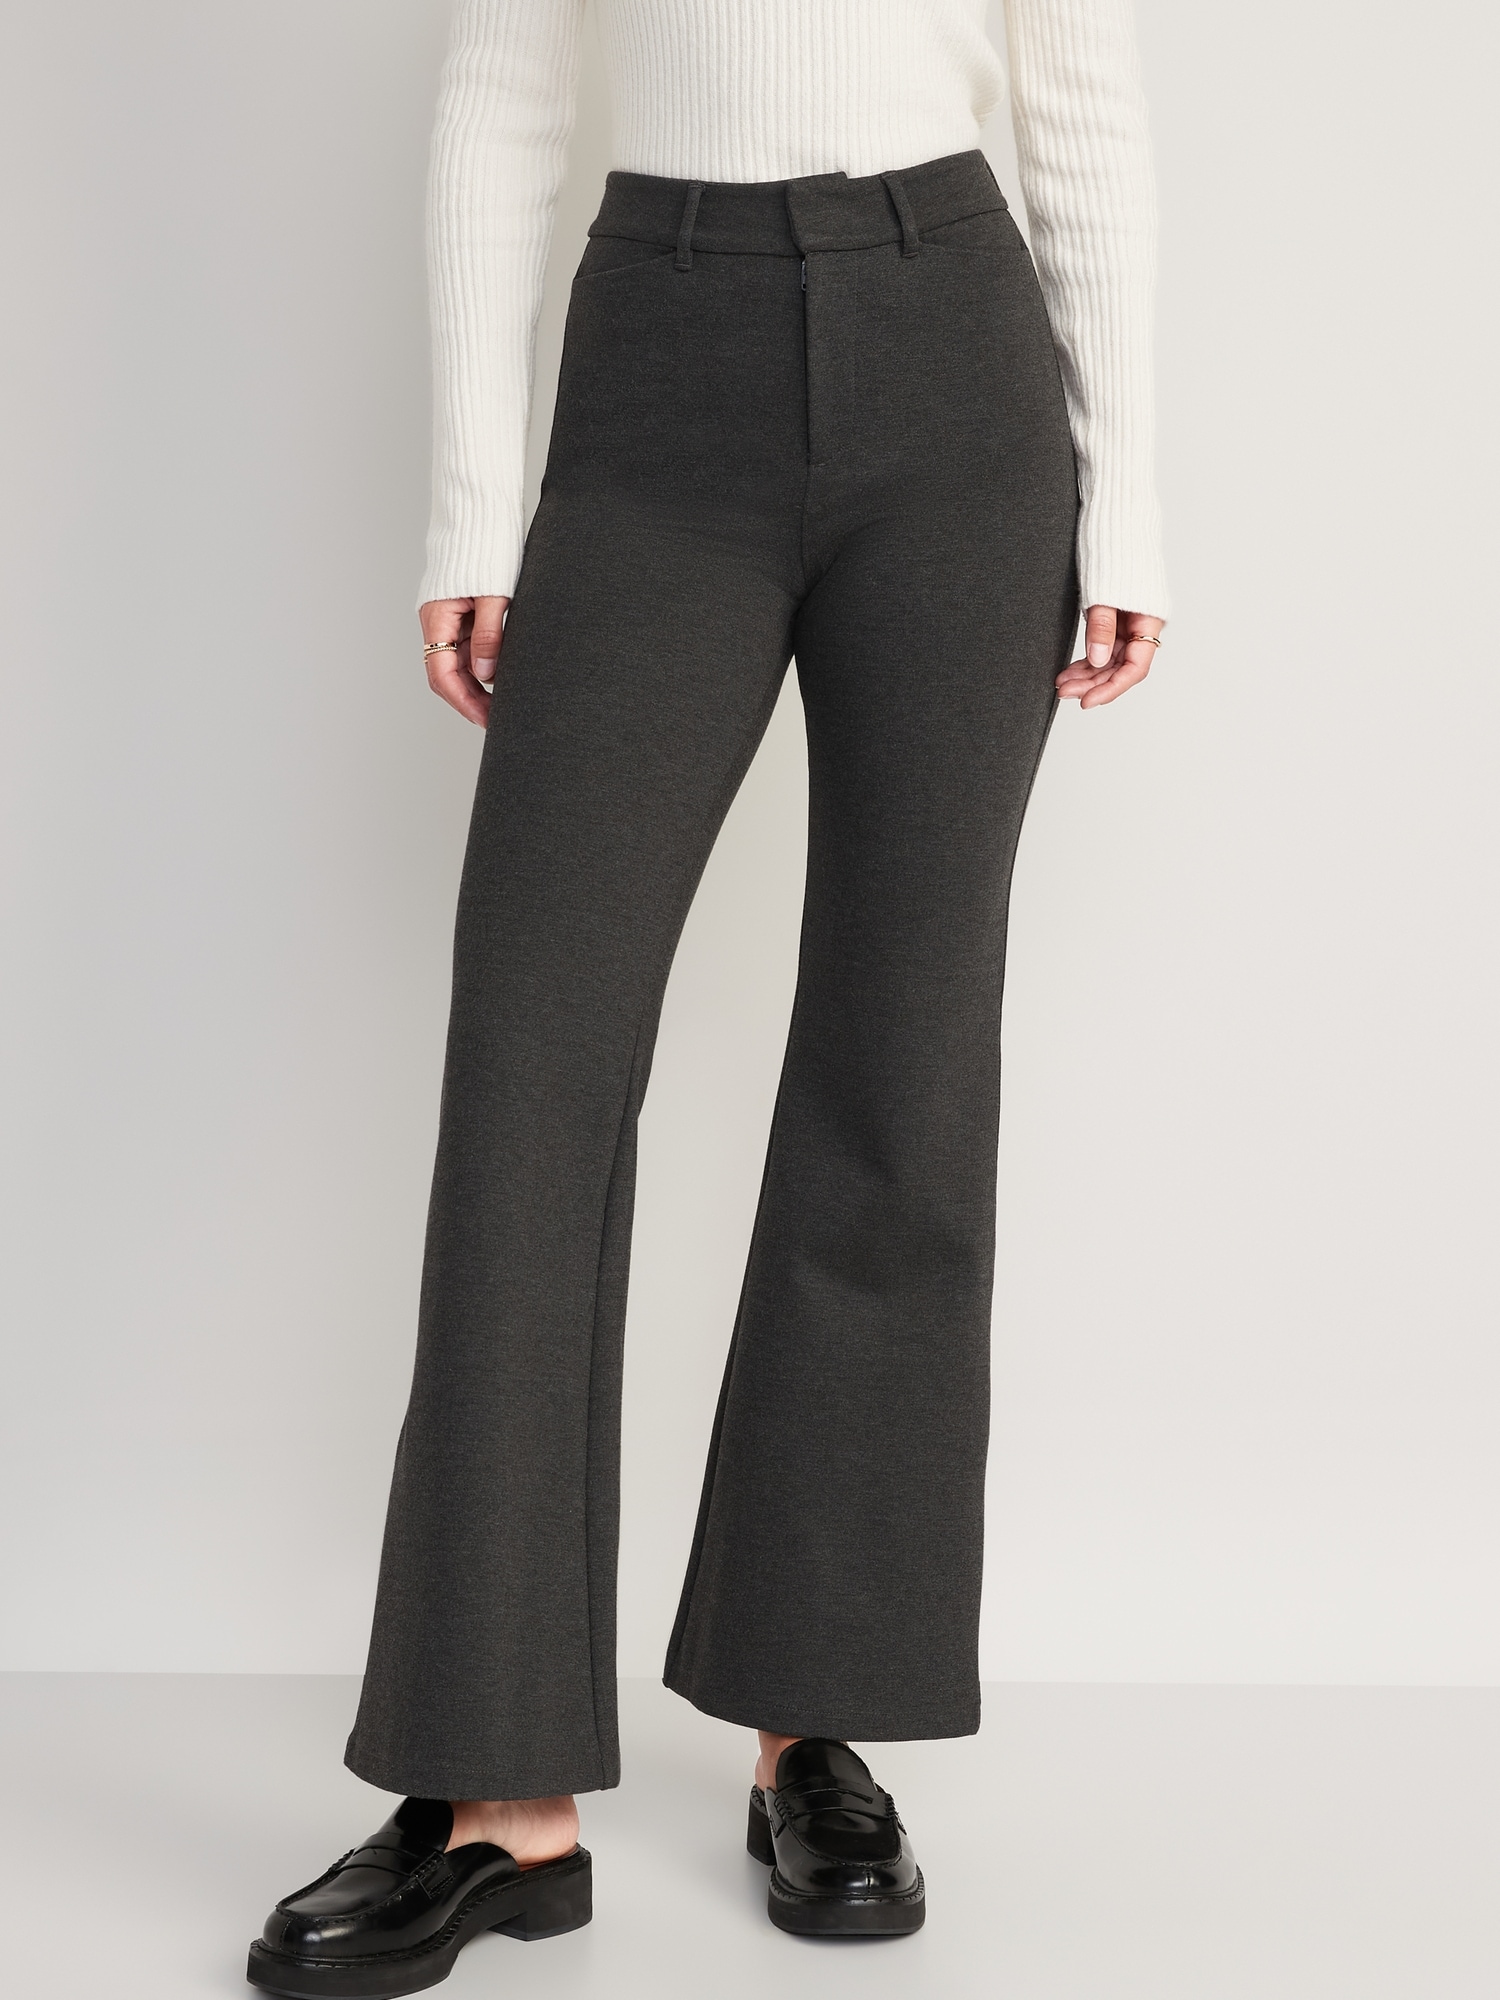 Plus Asymmetrical High Waist Flare Leg Trousers | Flare leg pants,  Fashionista clothes, Spring outfits casual